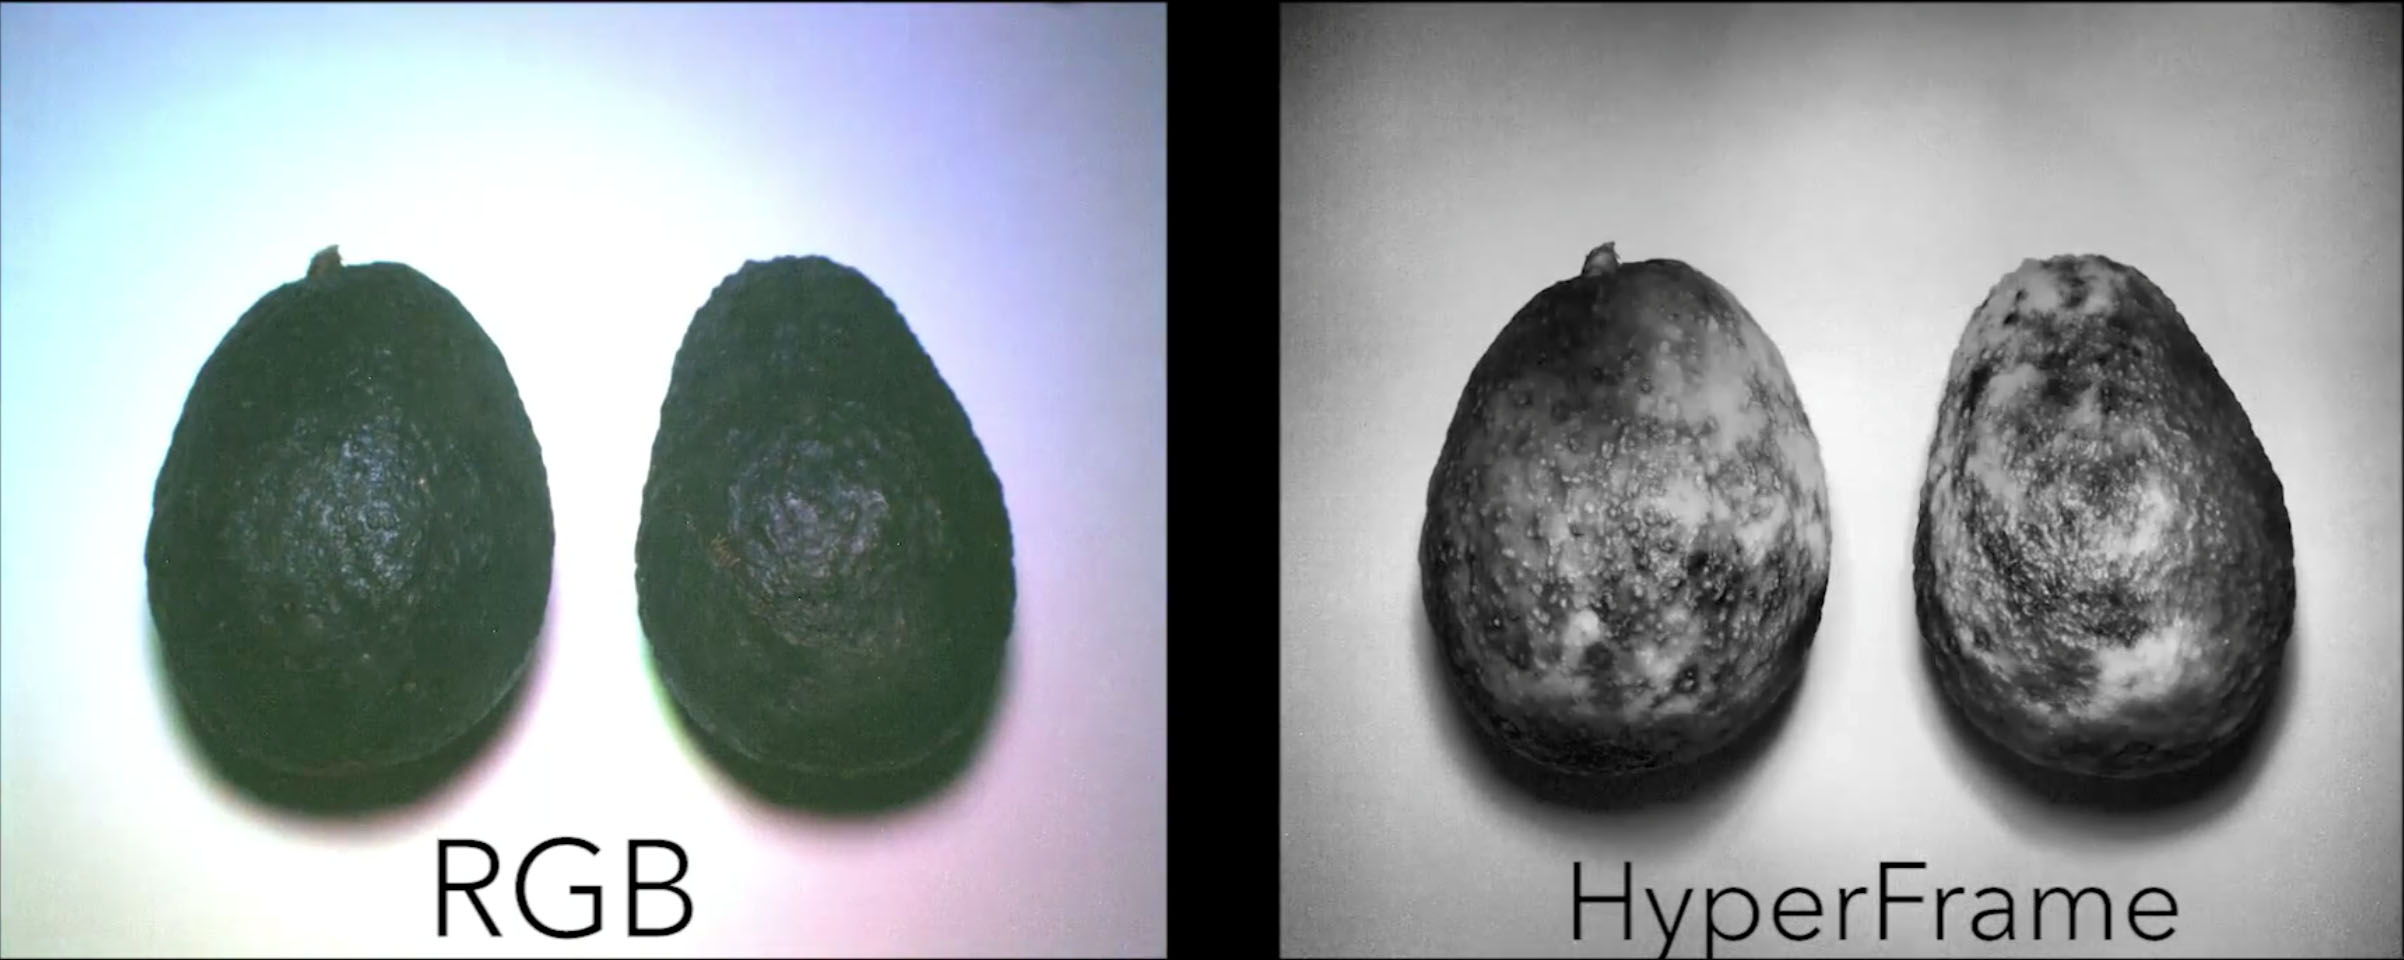 HyperFrames taken with HyperCam predicted the relative ripeness of 10 different fruits with 94% accuracy